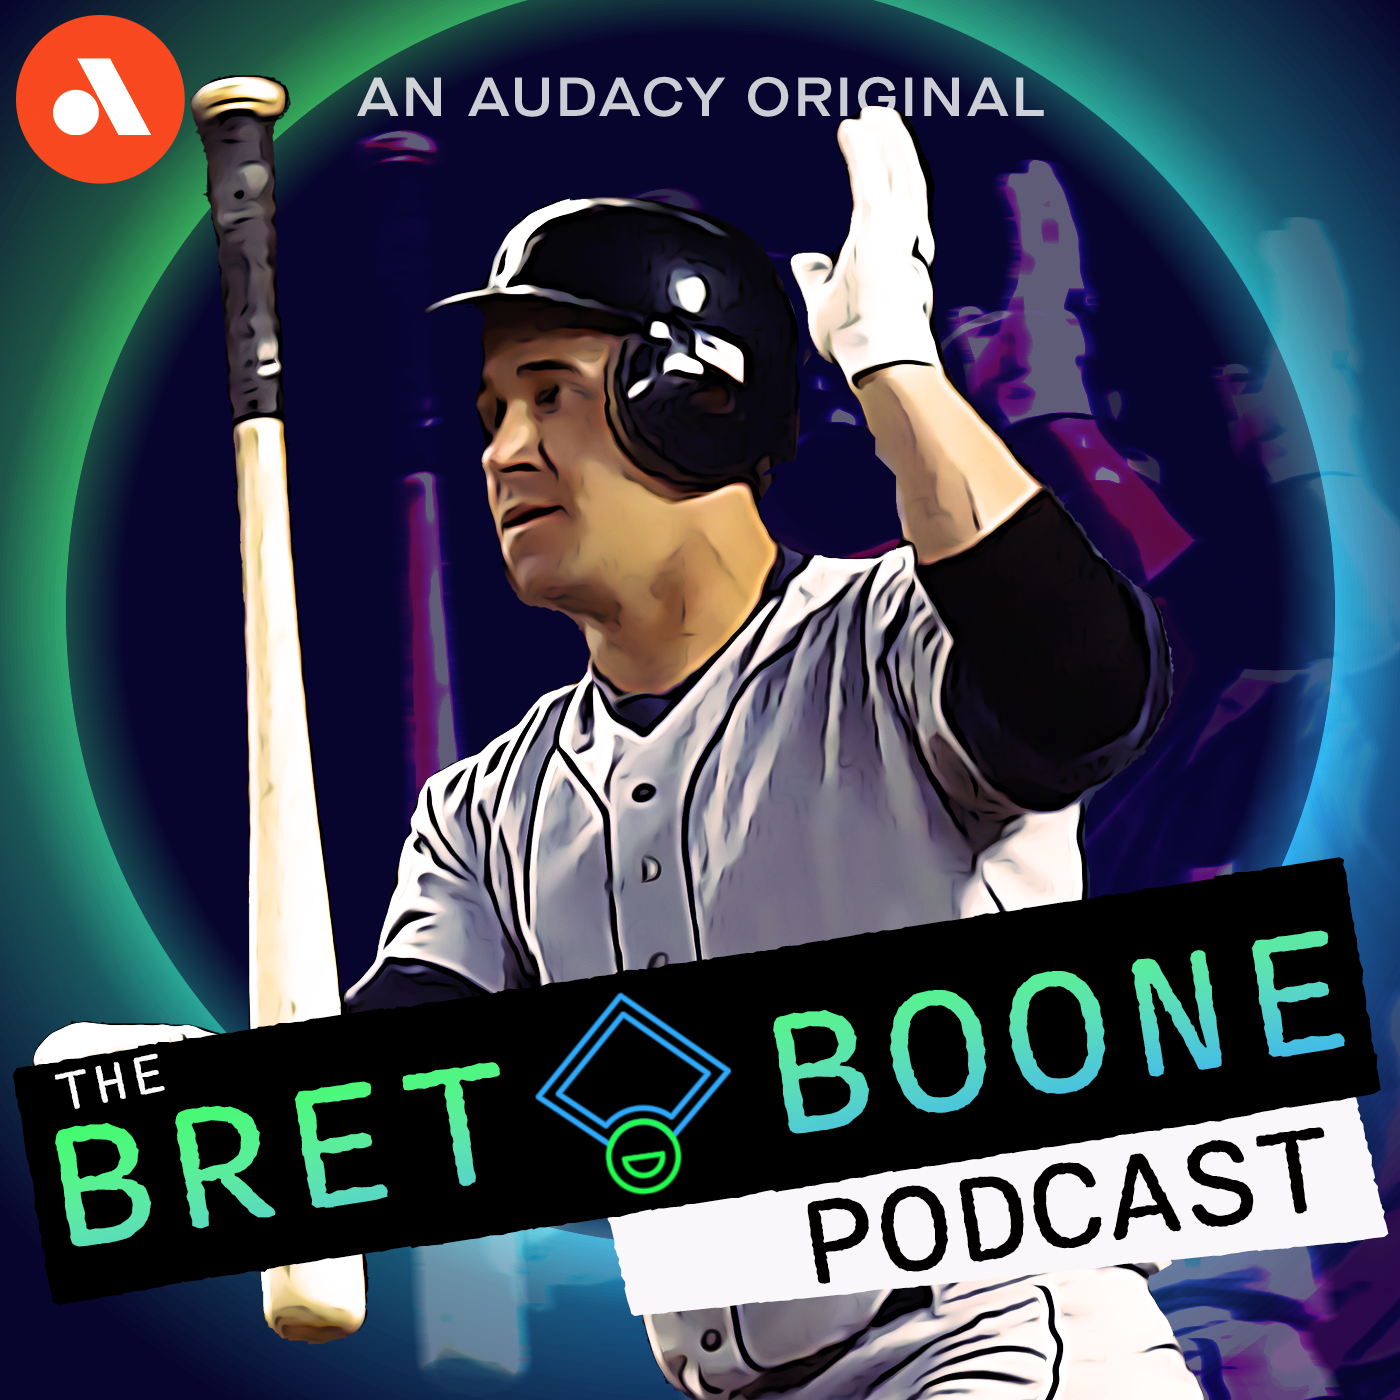 Bucky Dent On Playing For George Steinbrenner | 'The Bret Boone Podcast'